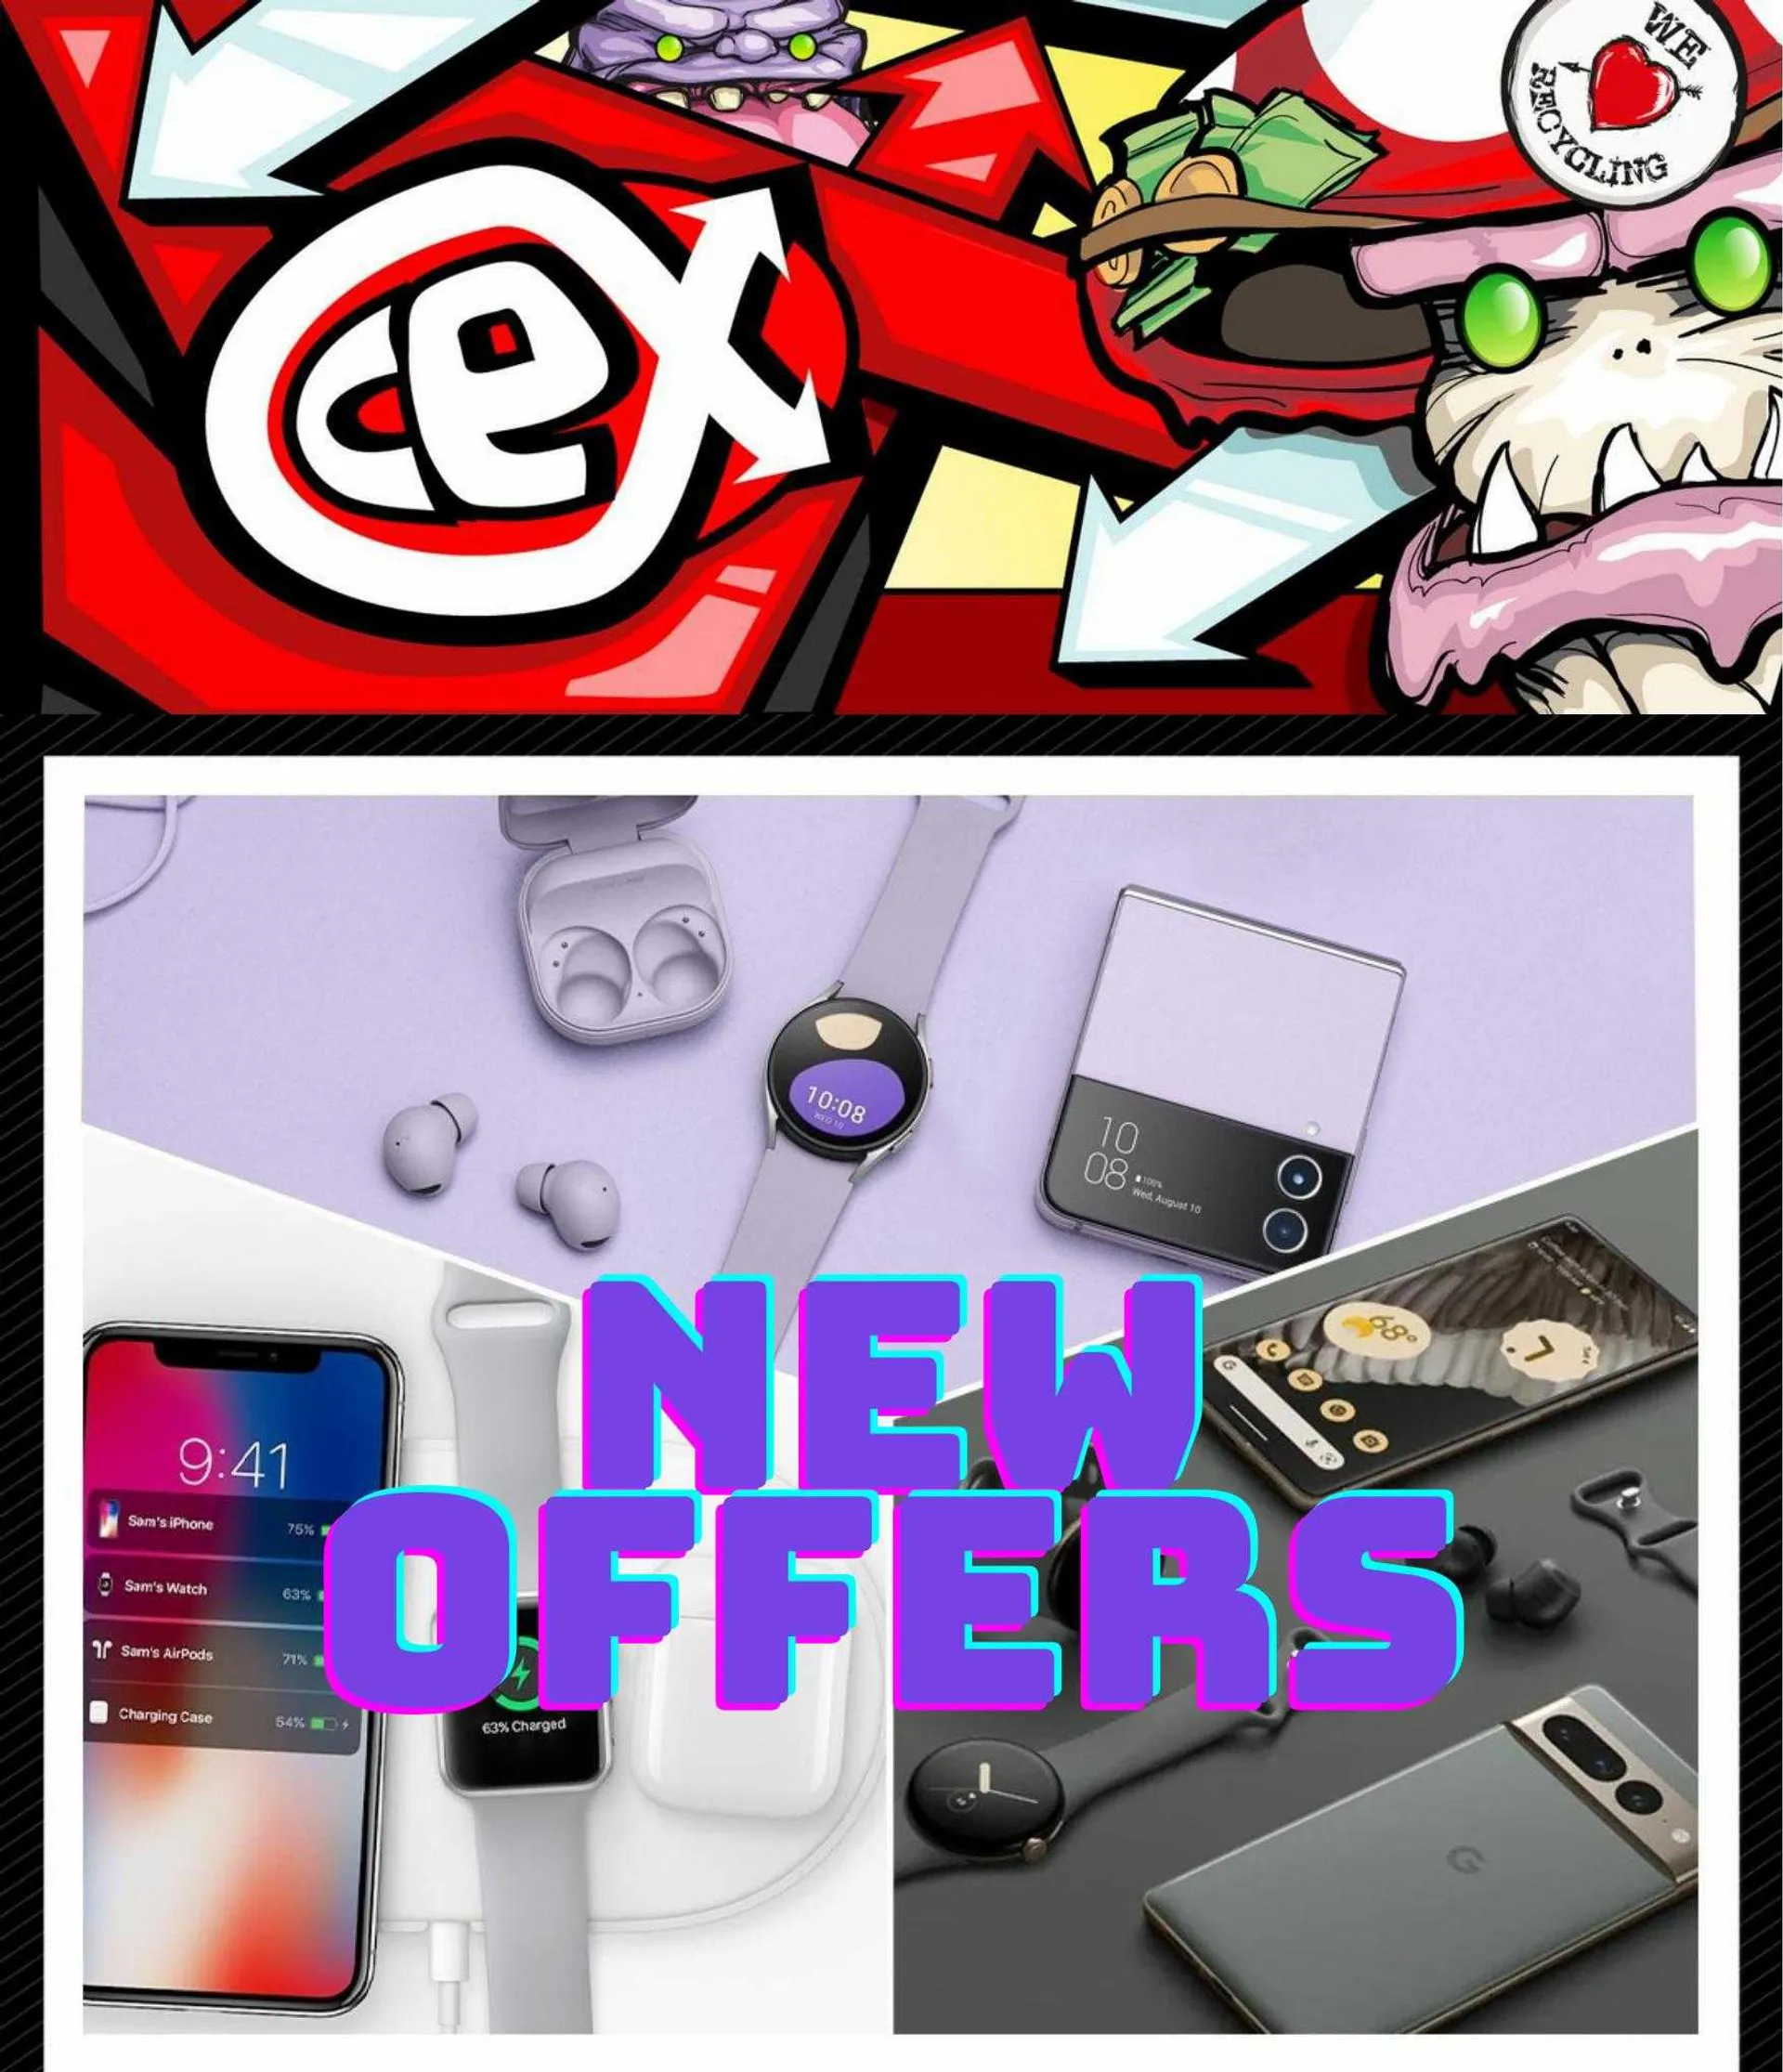 CeX Weekly Offers